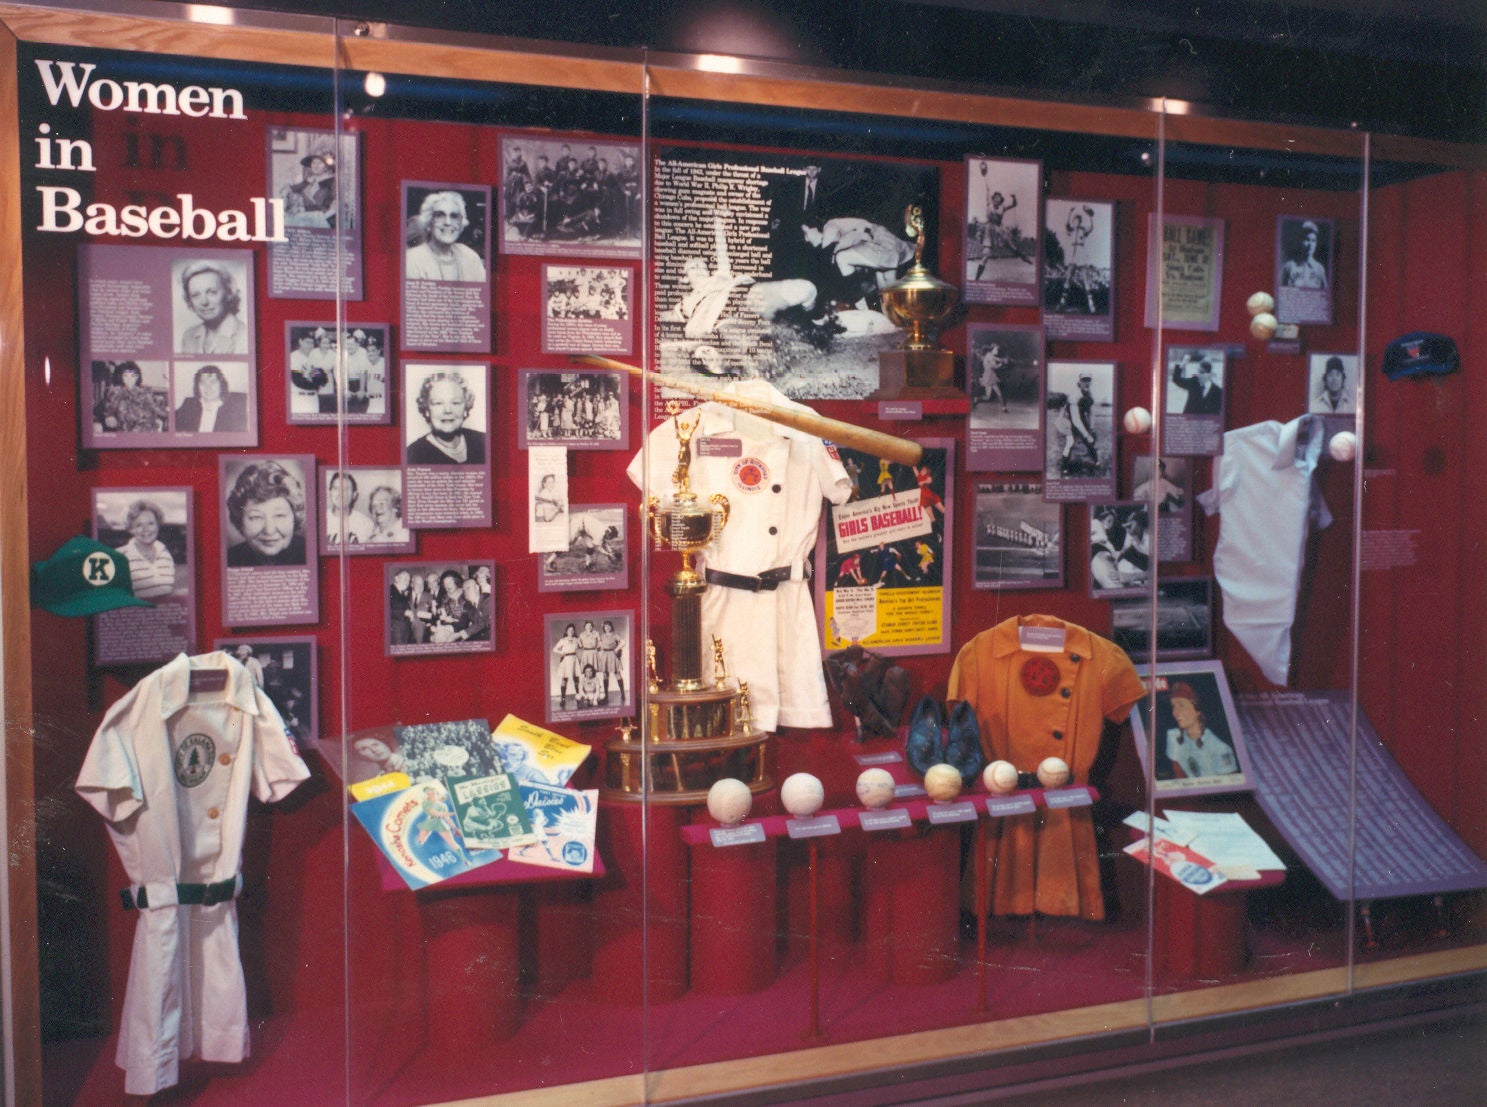 8 years ago, the AAGPBL came to Cooperstown   Baseball Hall of Fame